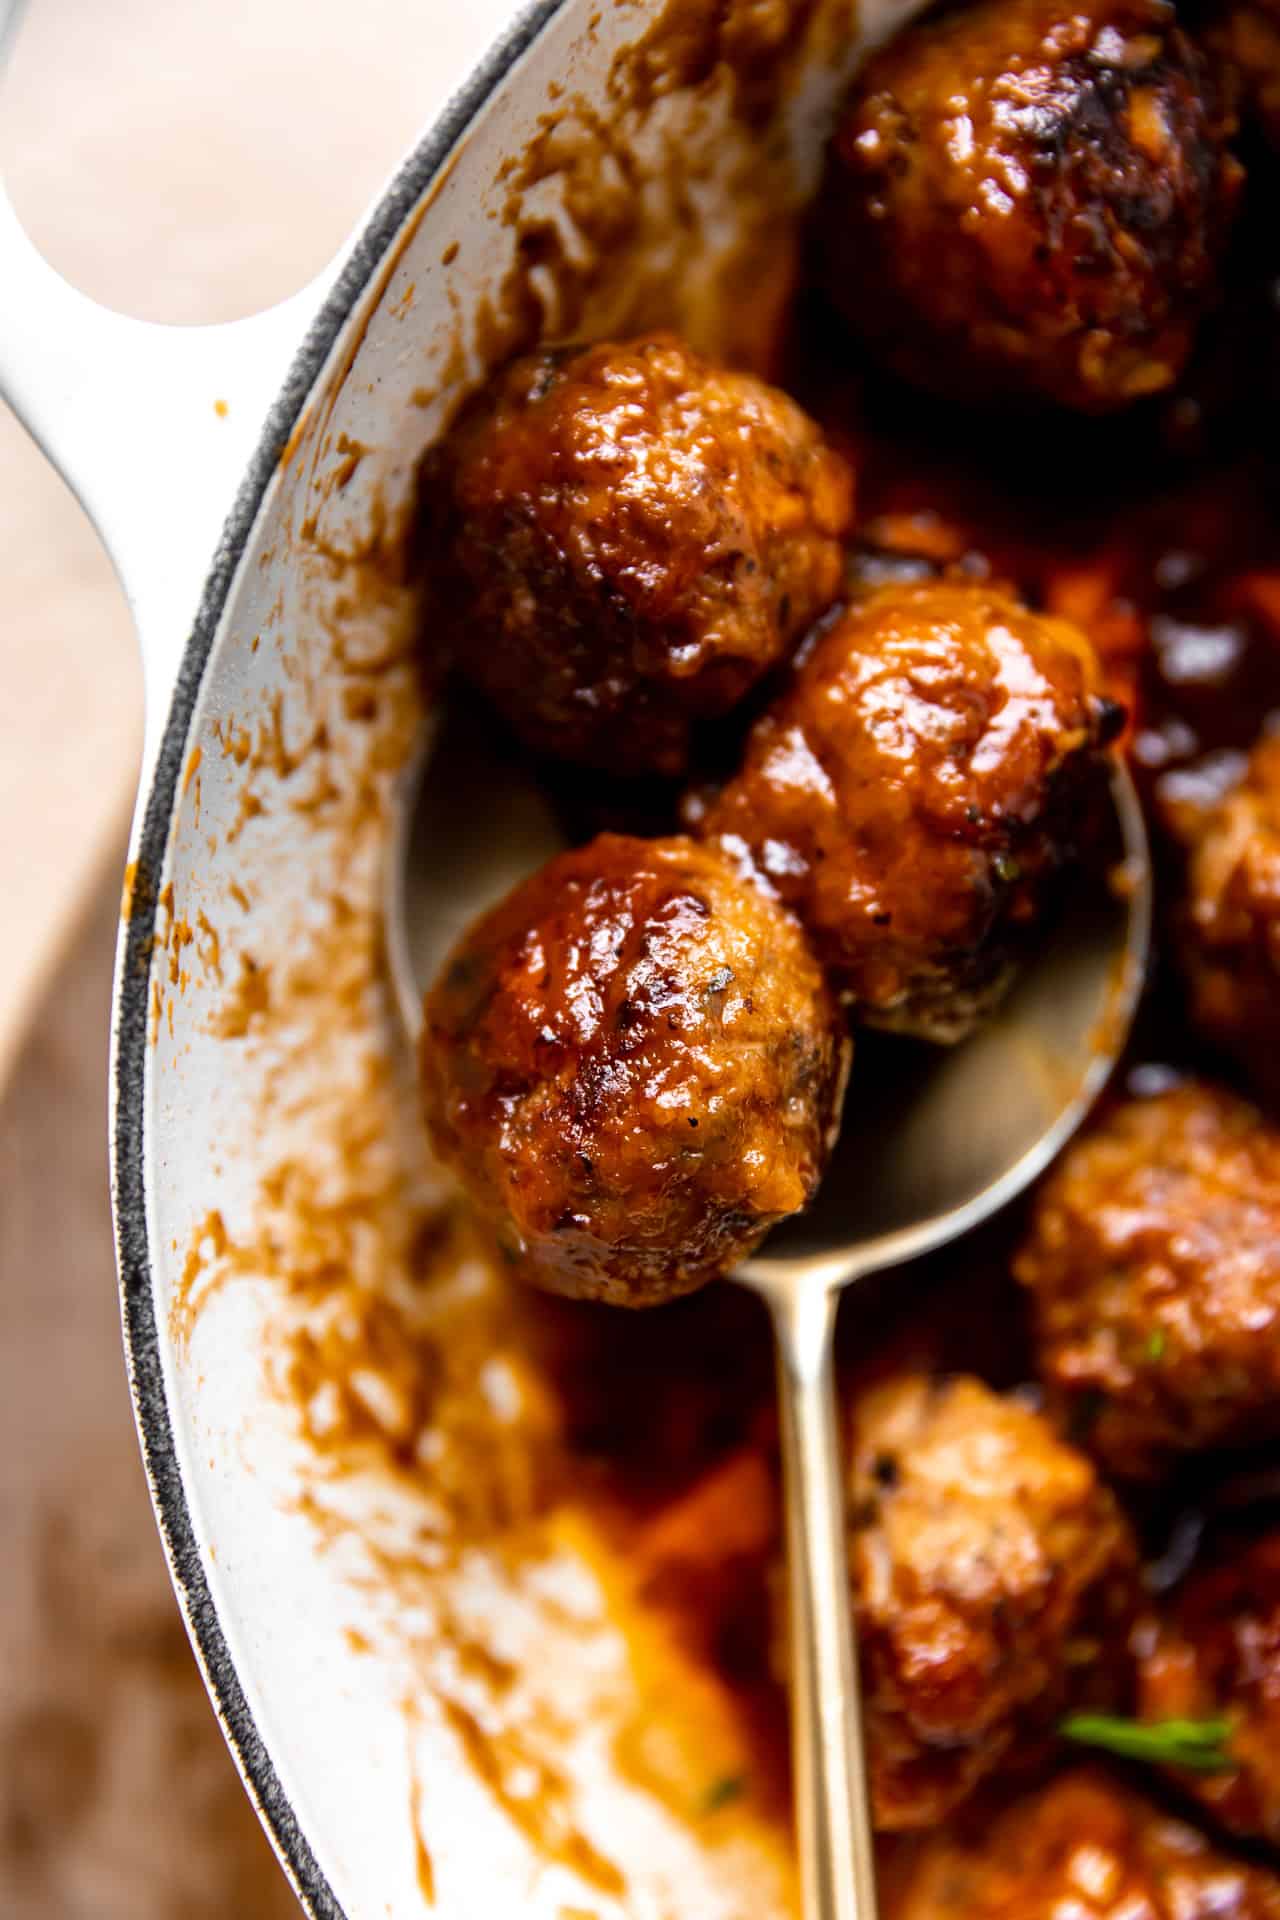 Spoon serving up cooked bacon meatballs in a bourbon BBQ sauce.